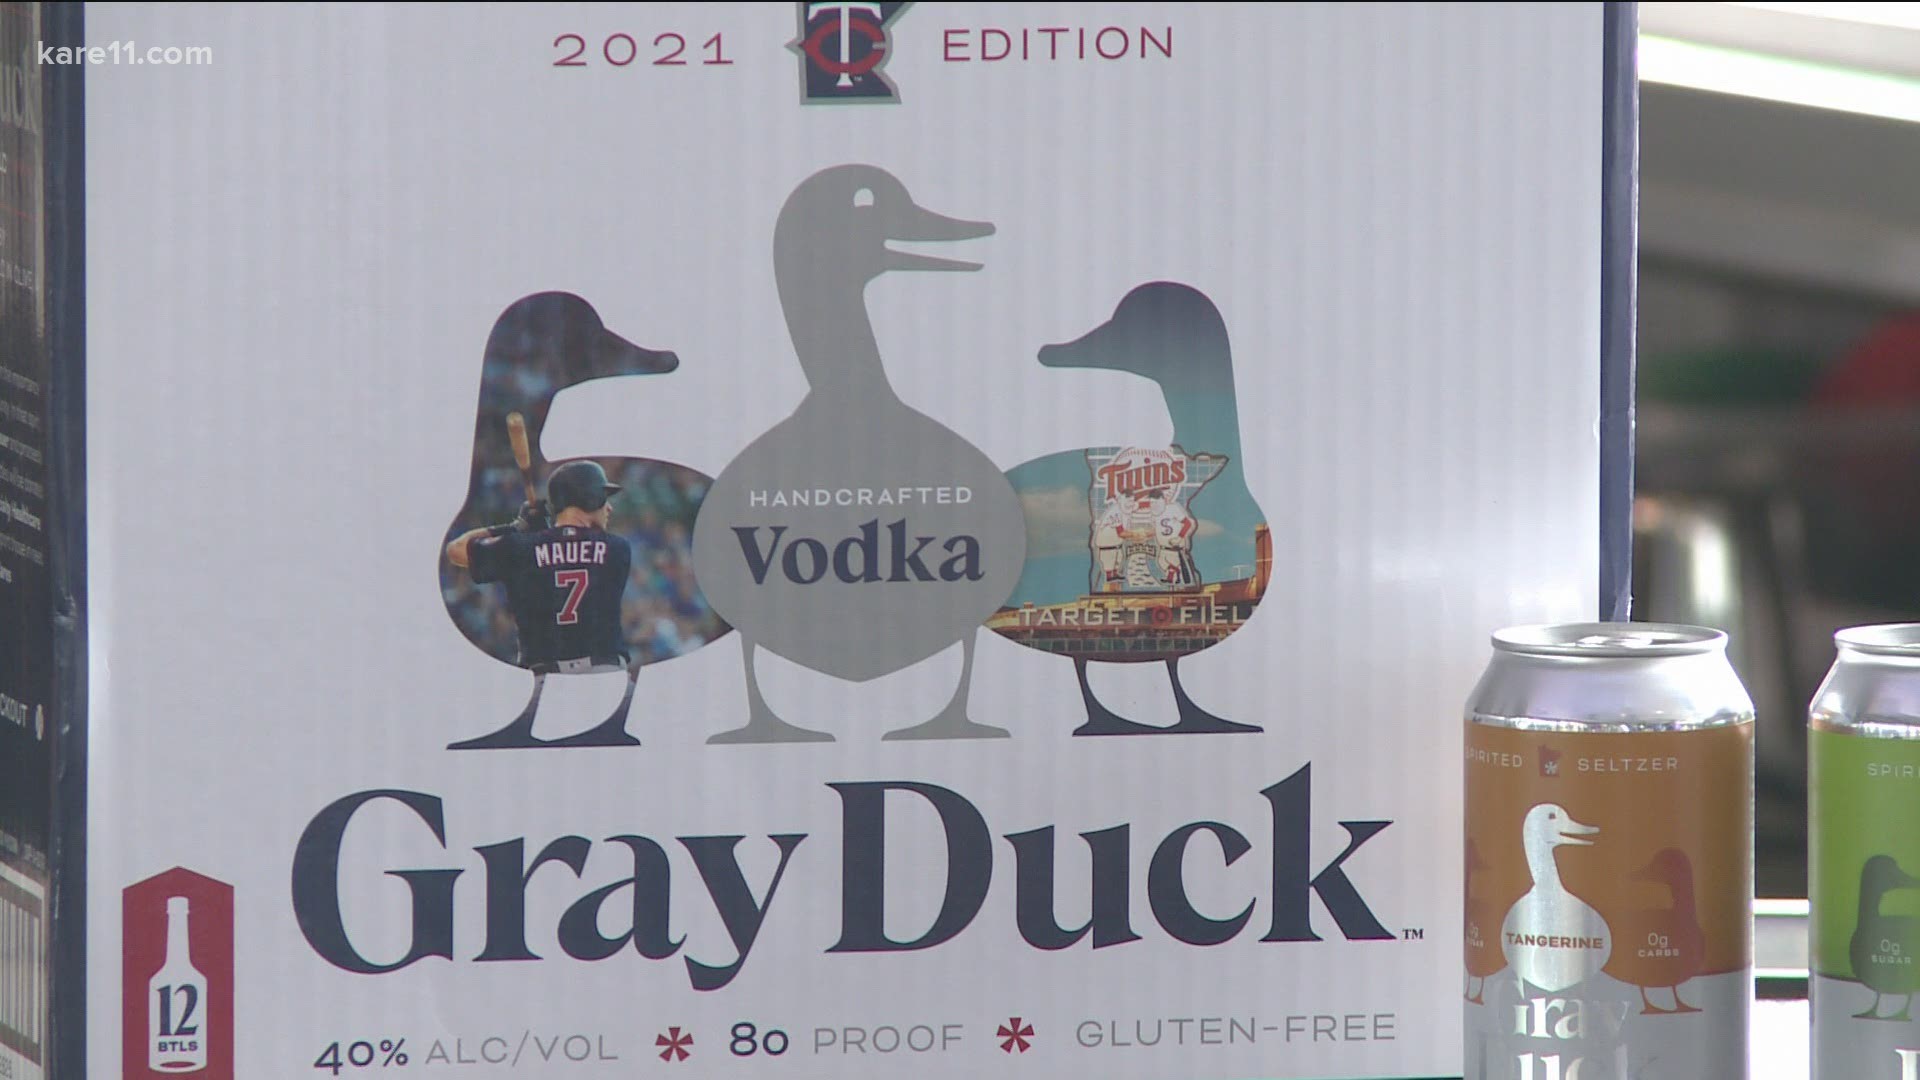 Joe Mauer and Chad Greenway helped unveil the new bottle on Wednesday at Target Field.